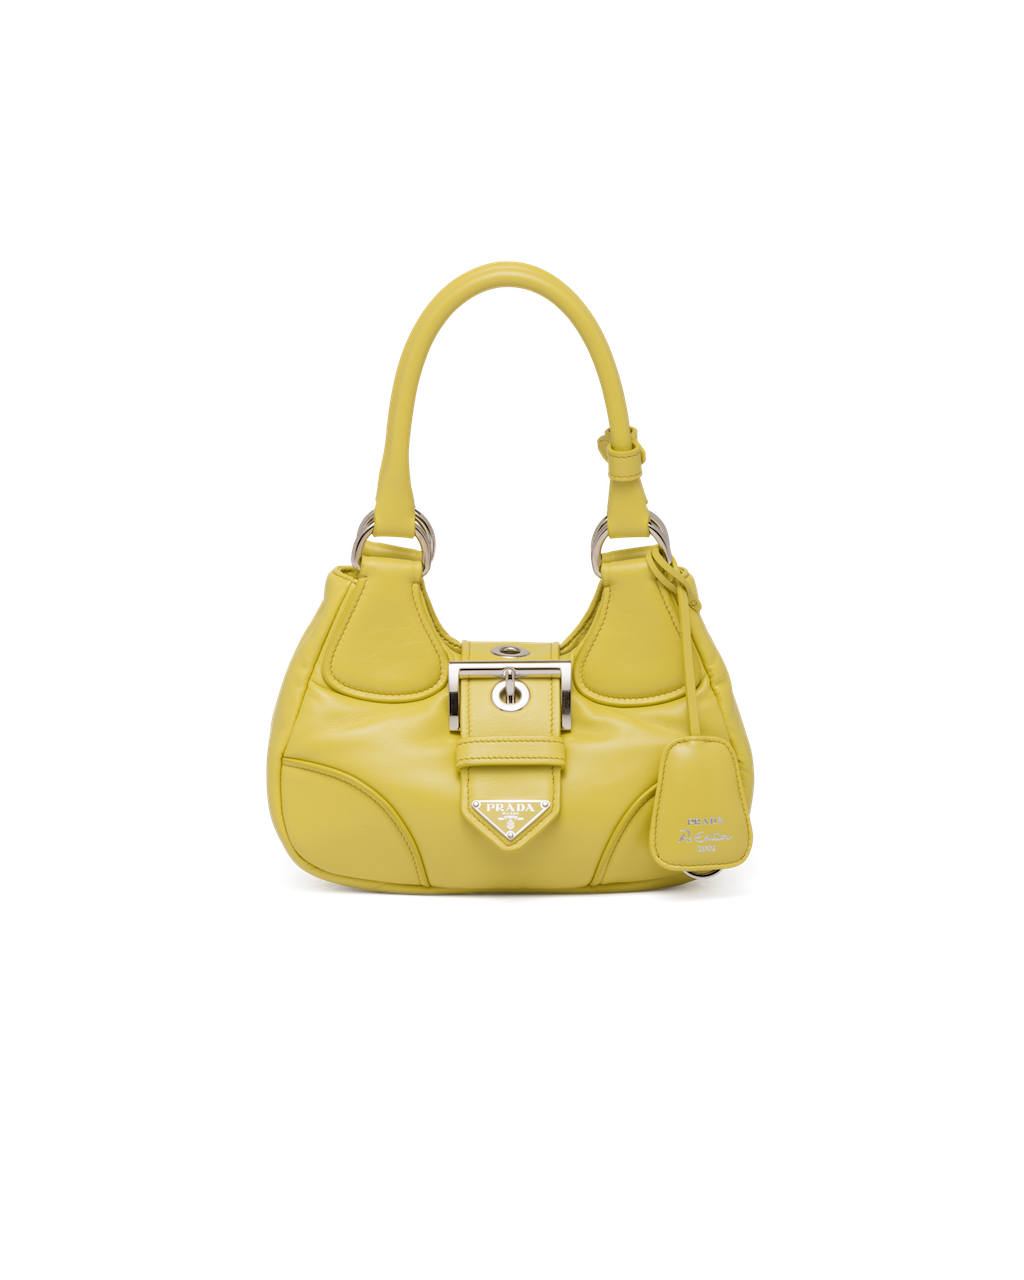 Prada Revisits an Iconic Style with the Prada Moon Bag